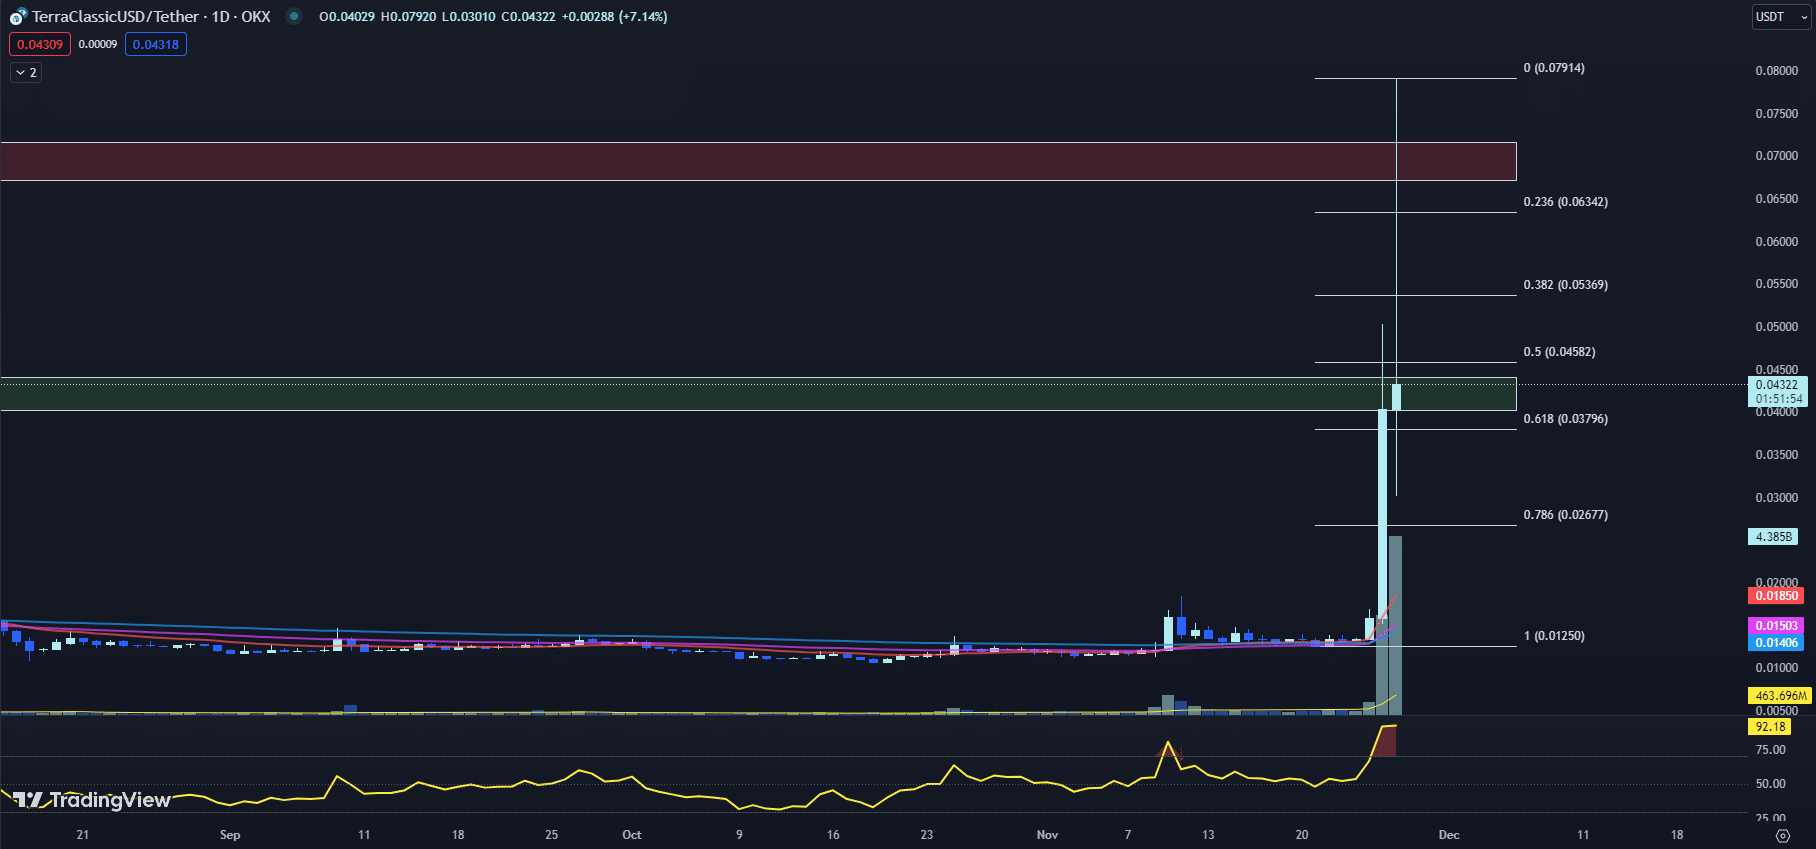 tradingview chart for the ustc price 